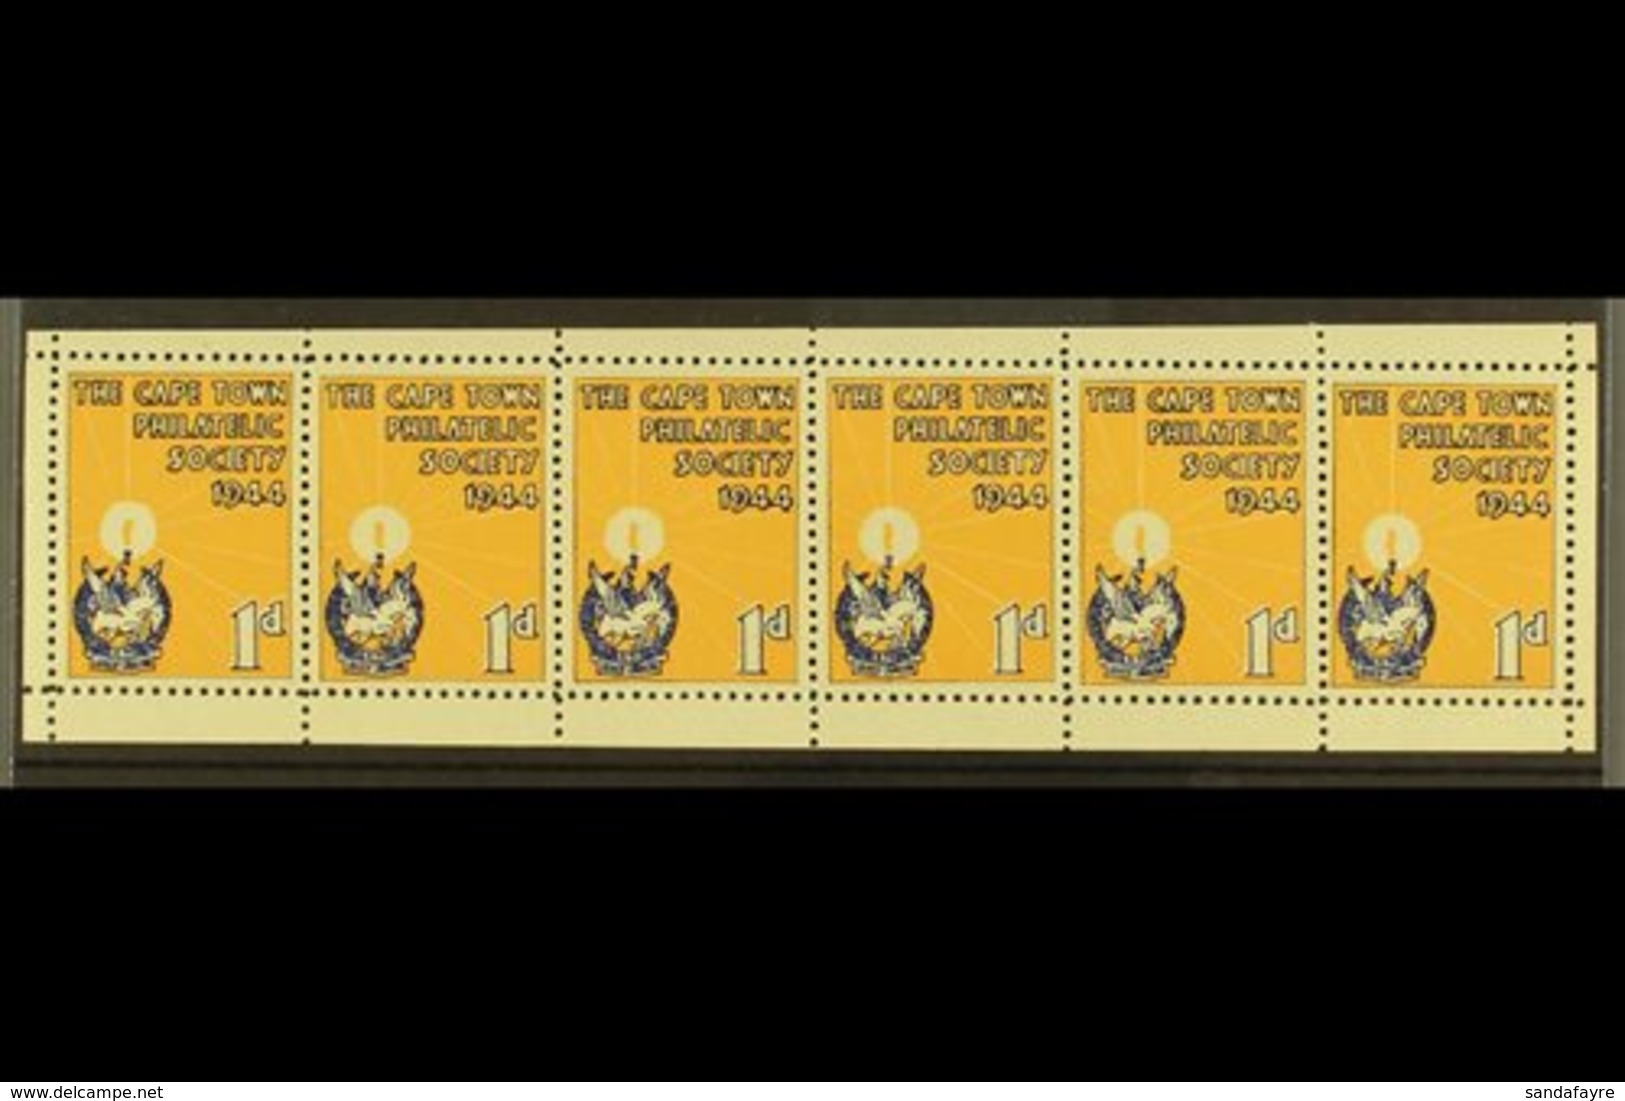 CINDERELLA LABEL  1944 "The Cape Town Philatelic Society" 1d Blue & Buff, Strip Of 6 Labels With Margins All Around, Gum - Unclassified